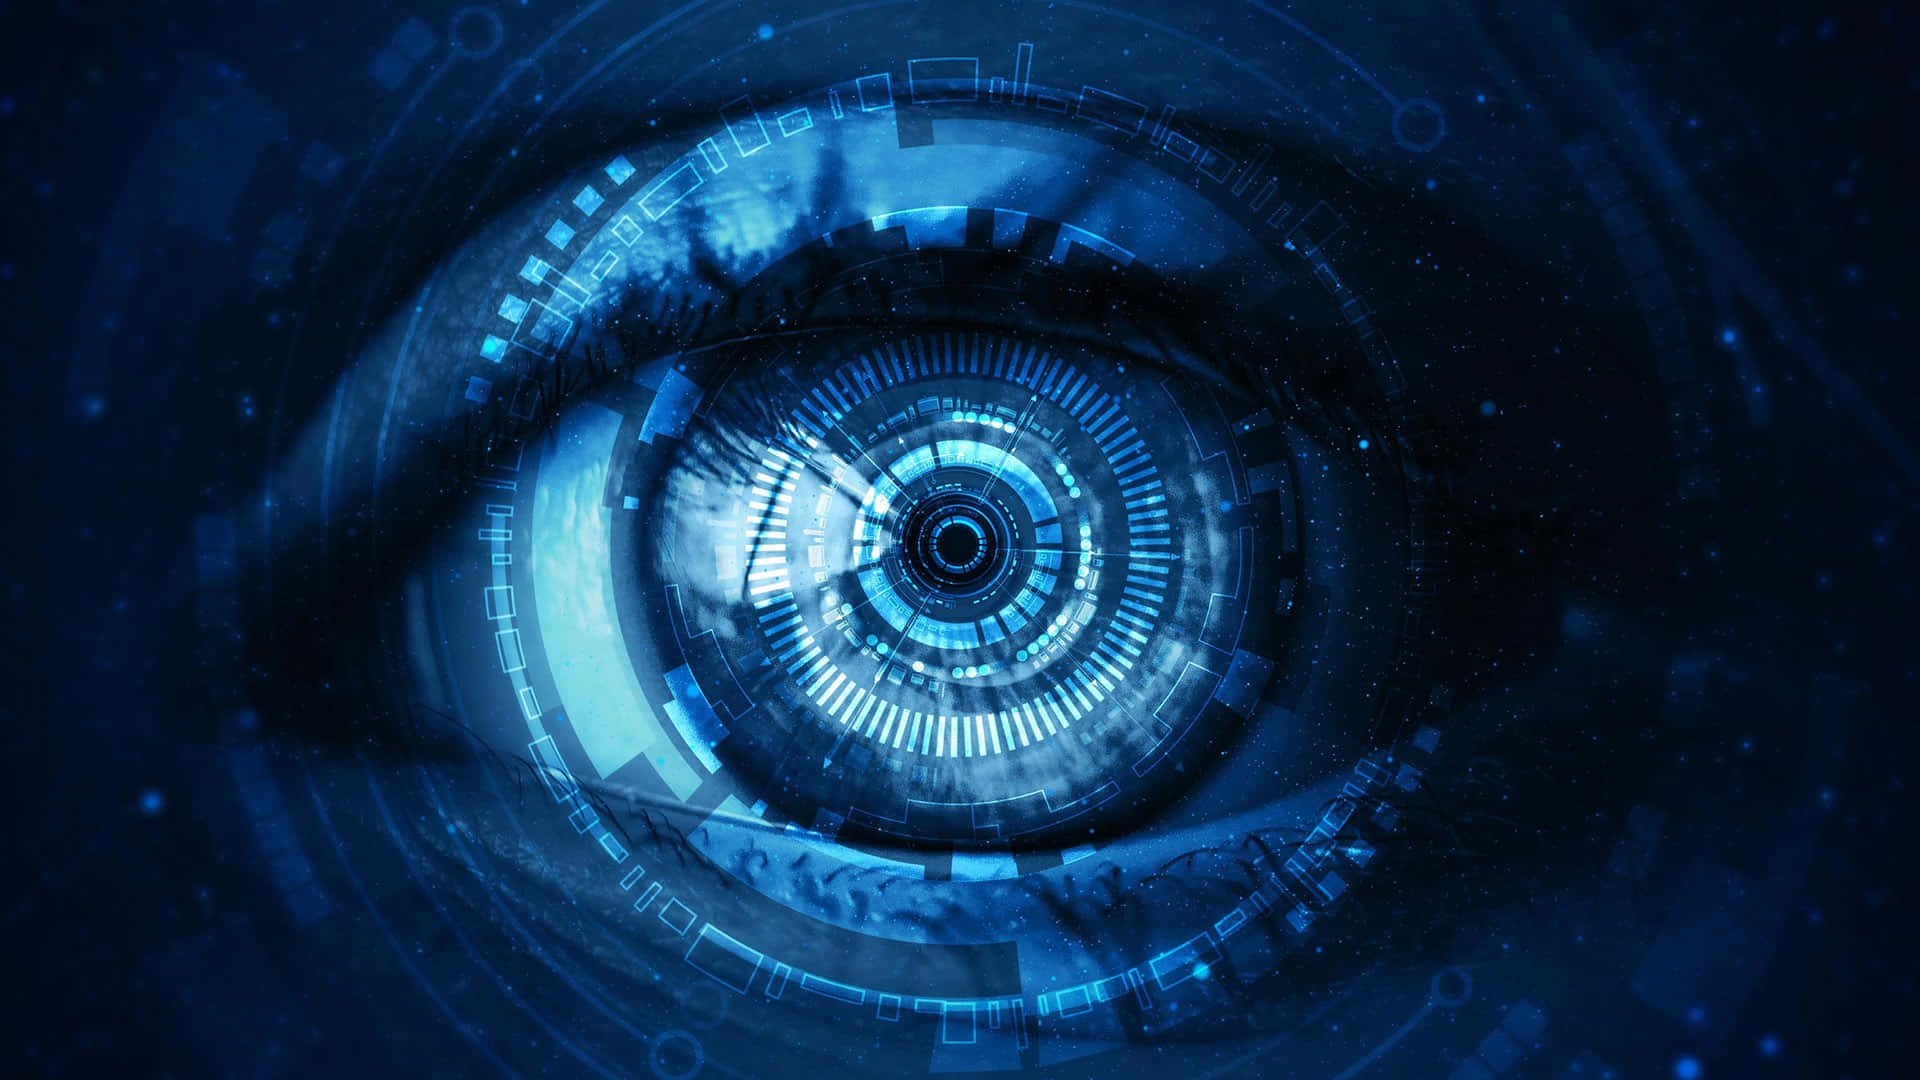 An Eye With A Blue Background And A Digital Eye